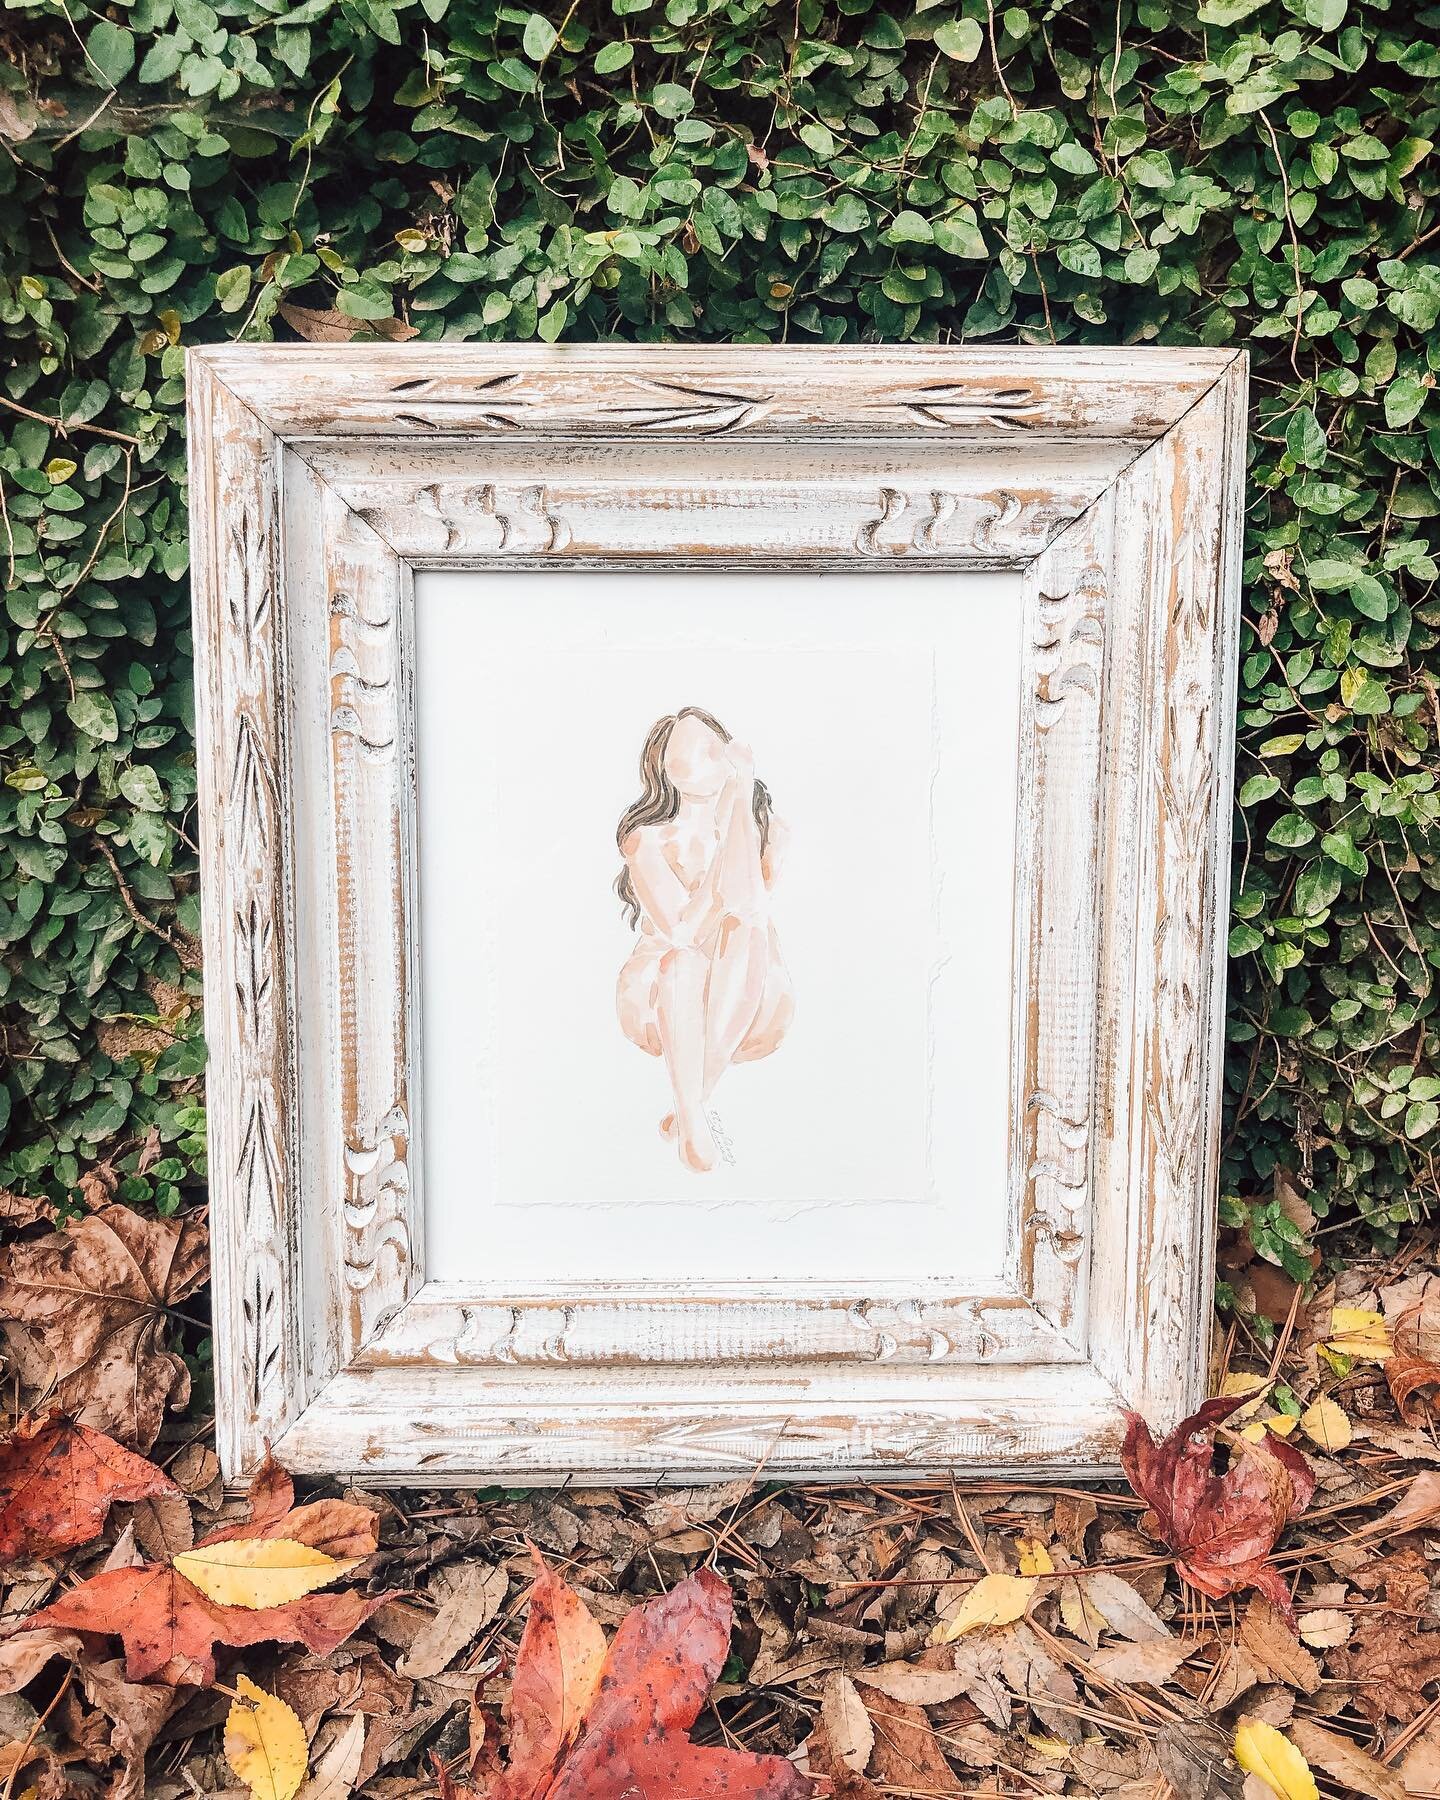 Another lovely lady that would make a great Christmas present! This frame is one of my favorites. 

#painting #watercolor #christmaspresent #gift #annaleighdesign